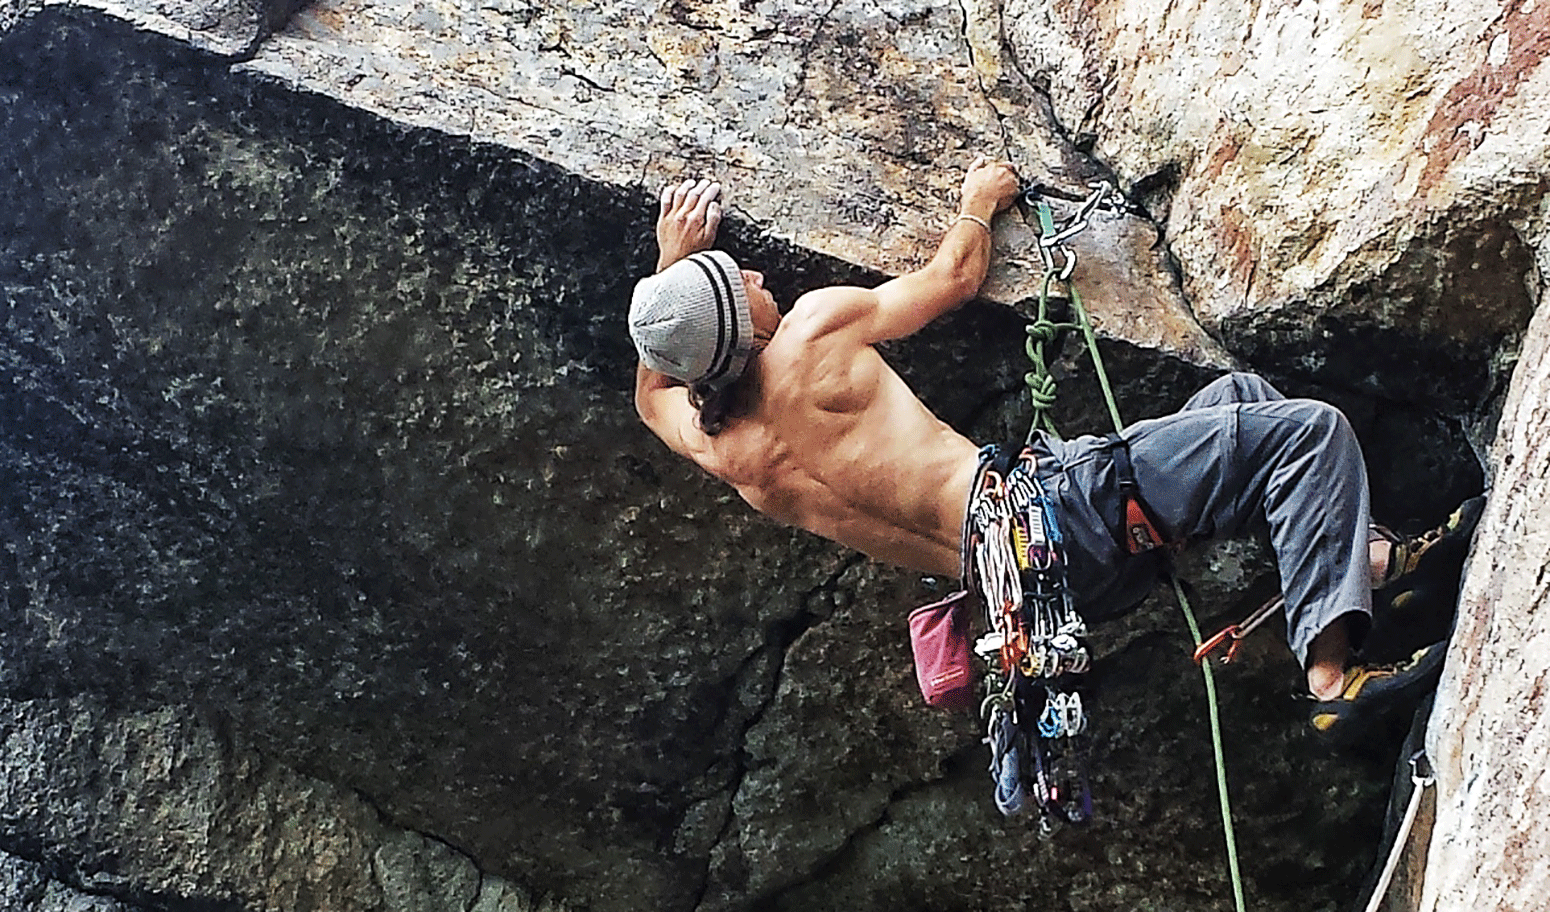 Chris Vultaggio, professional photographer and Mountainsmith Ambassador is shown climbing an over-hanging, blocky route. 